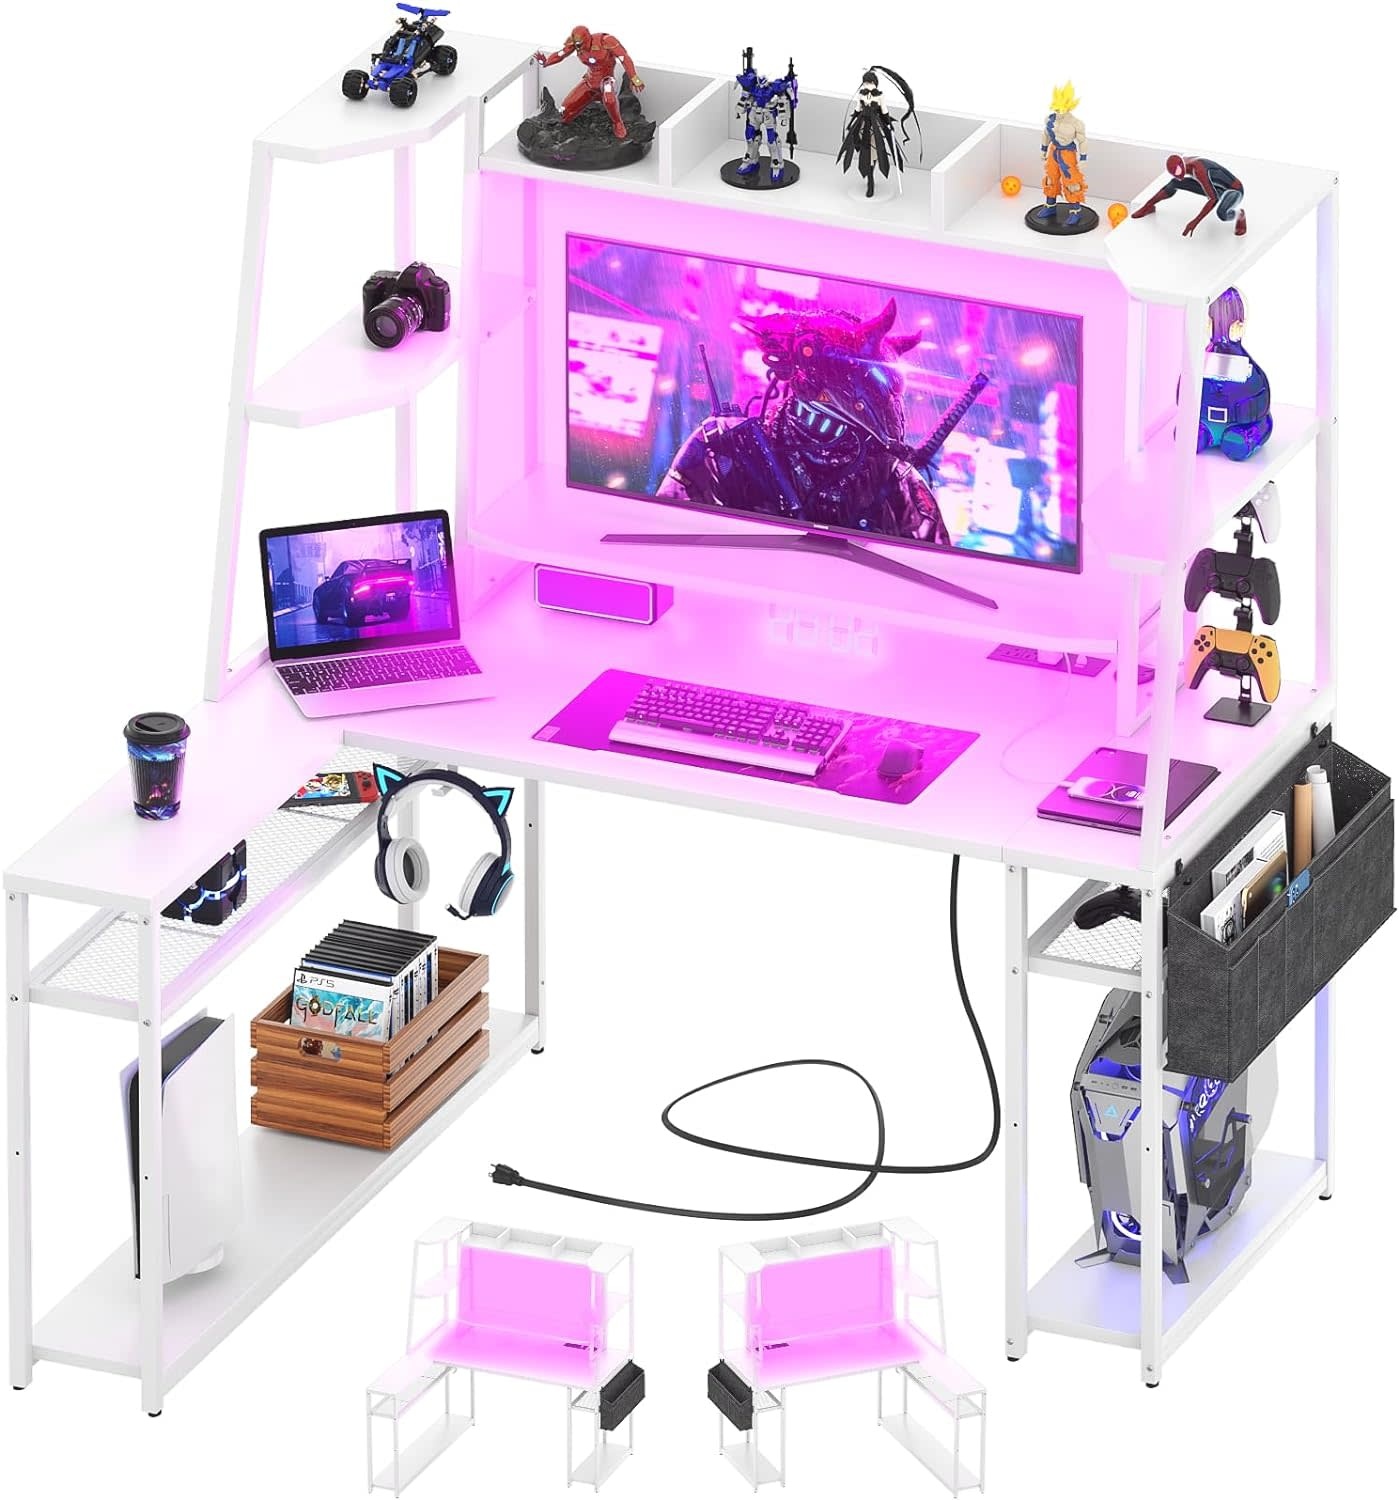  armocity Computer Desk with LED, Gaming Desk with